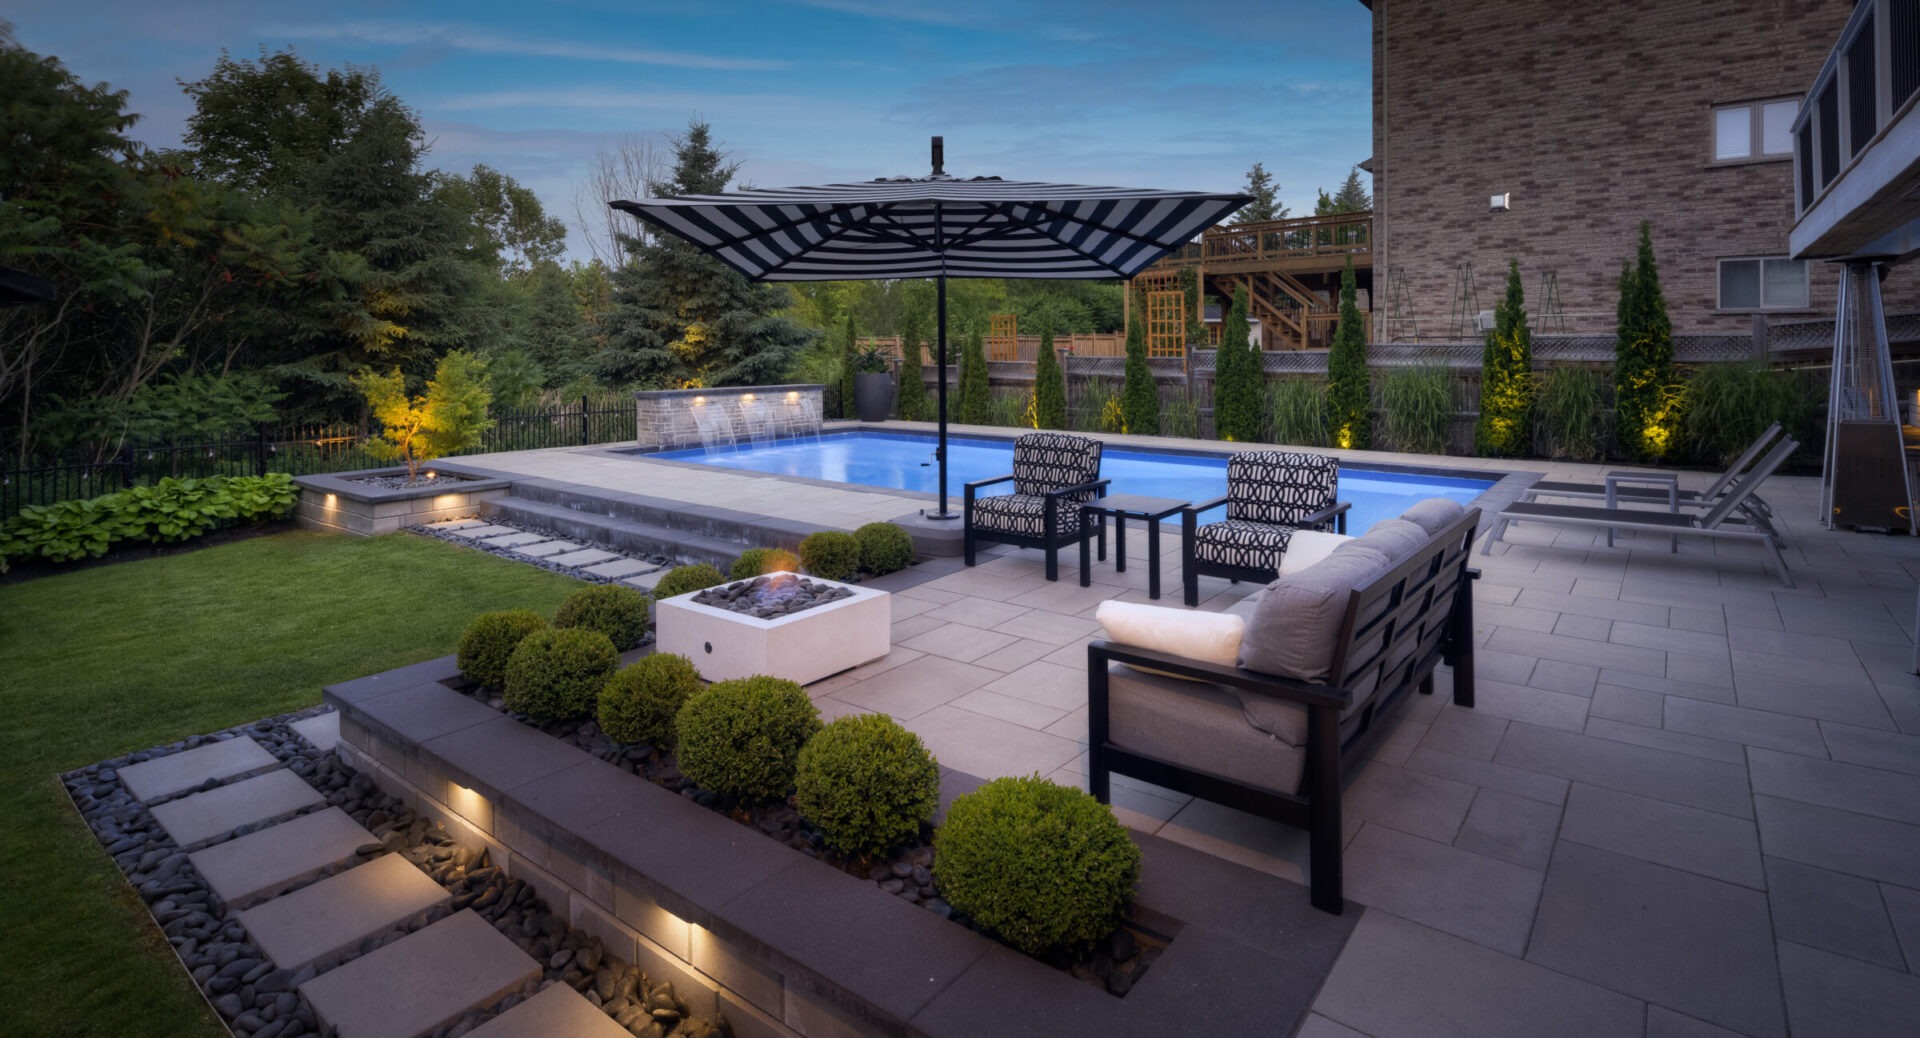 A serene backyard at dusk featuring a swimming pool, neatly landscaped garden, patio furniture, fire pit, and an elegant lounging area under an umbrella.